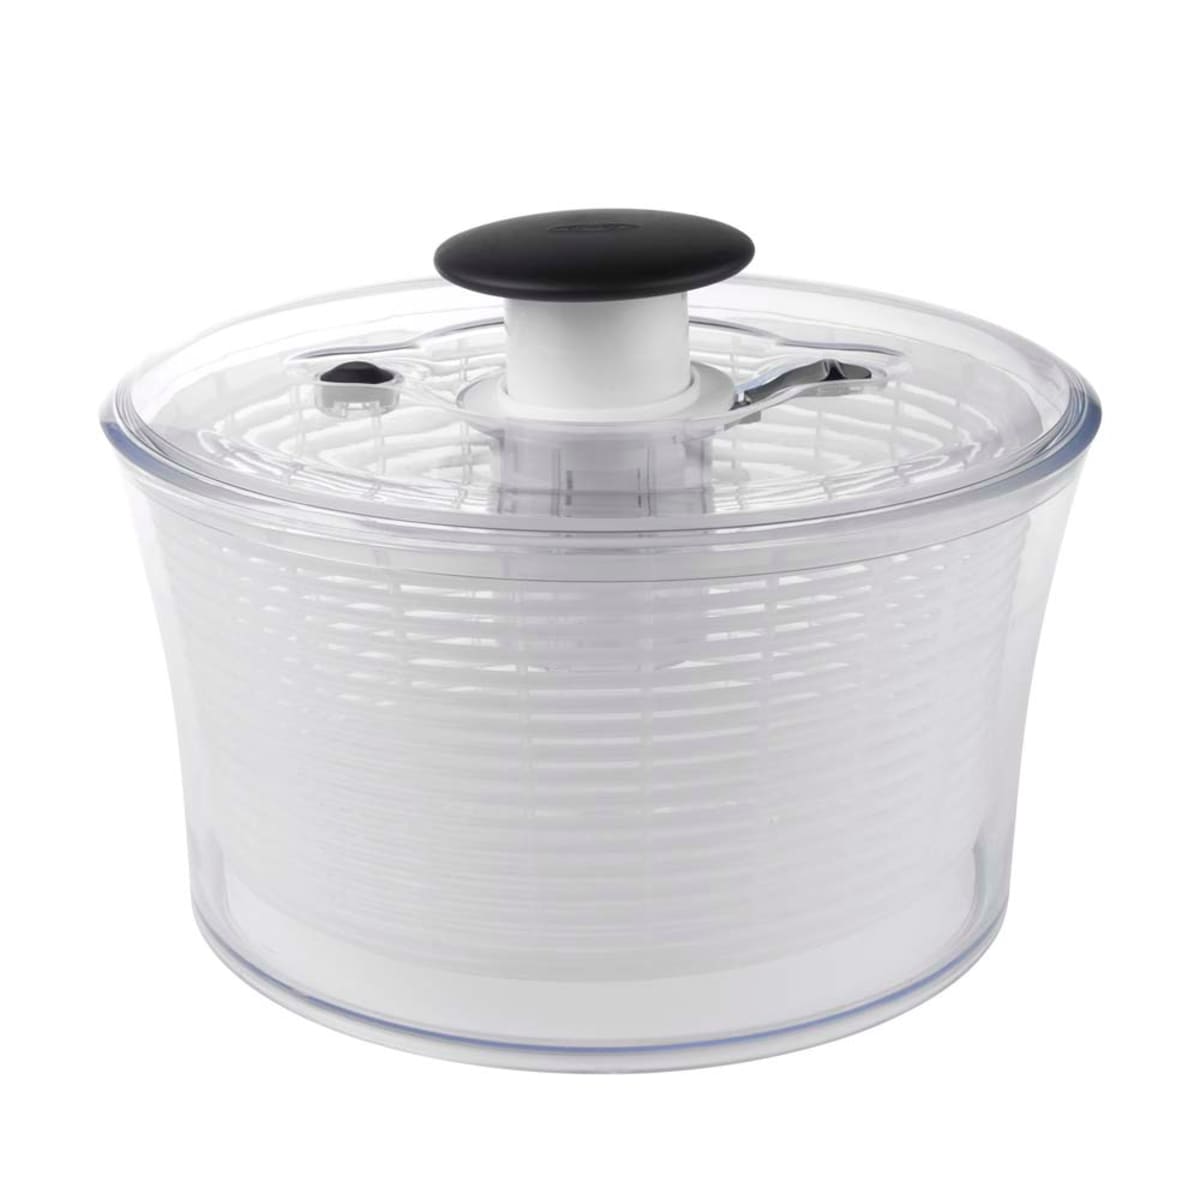 OXO Good Grips Large Salad Spinner - 6.22 Qt. 3 piece set See Pics